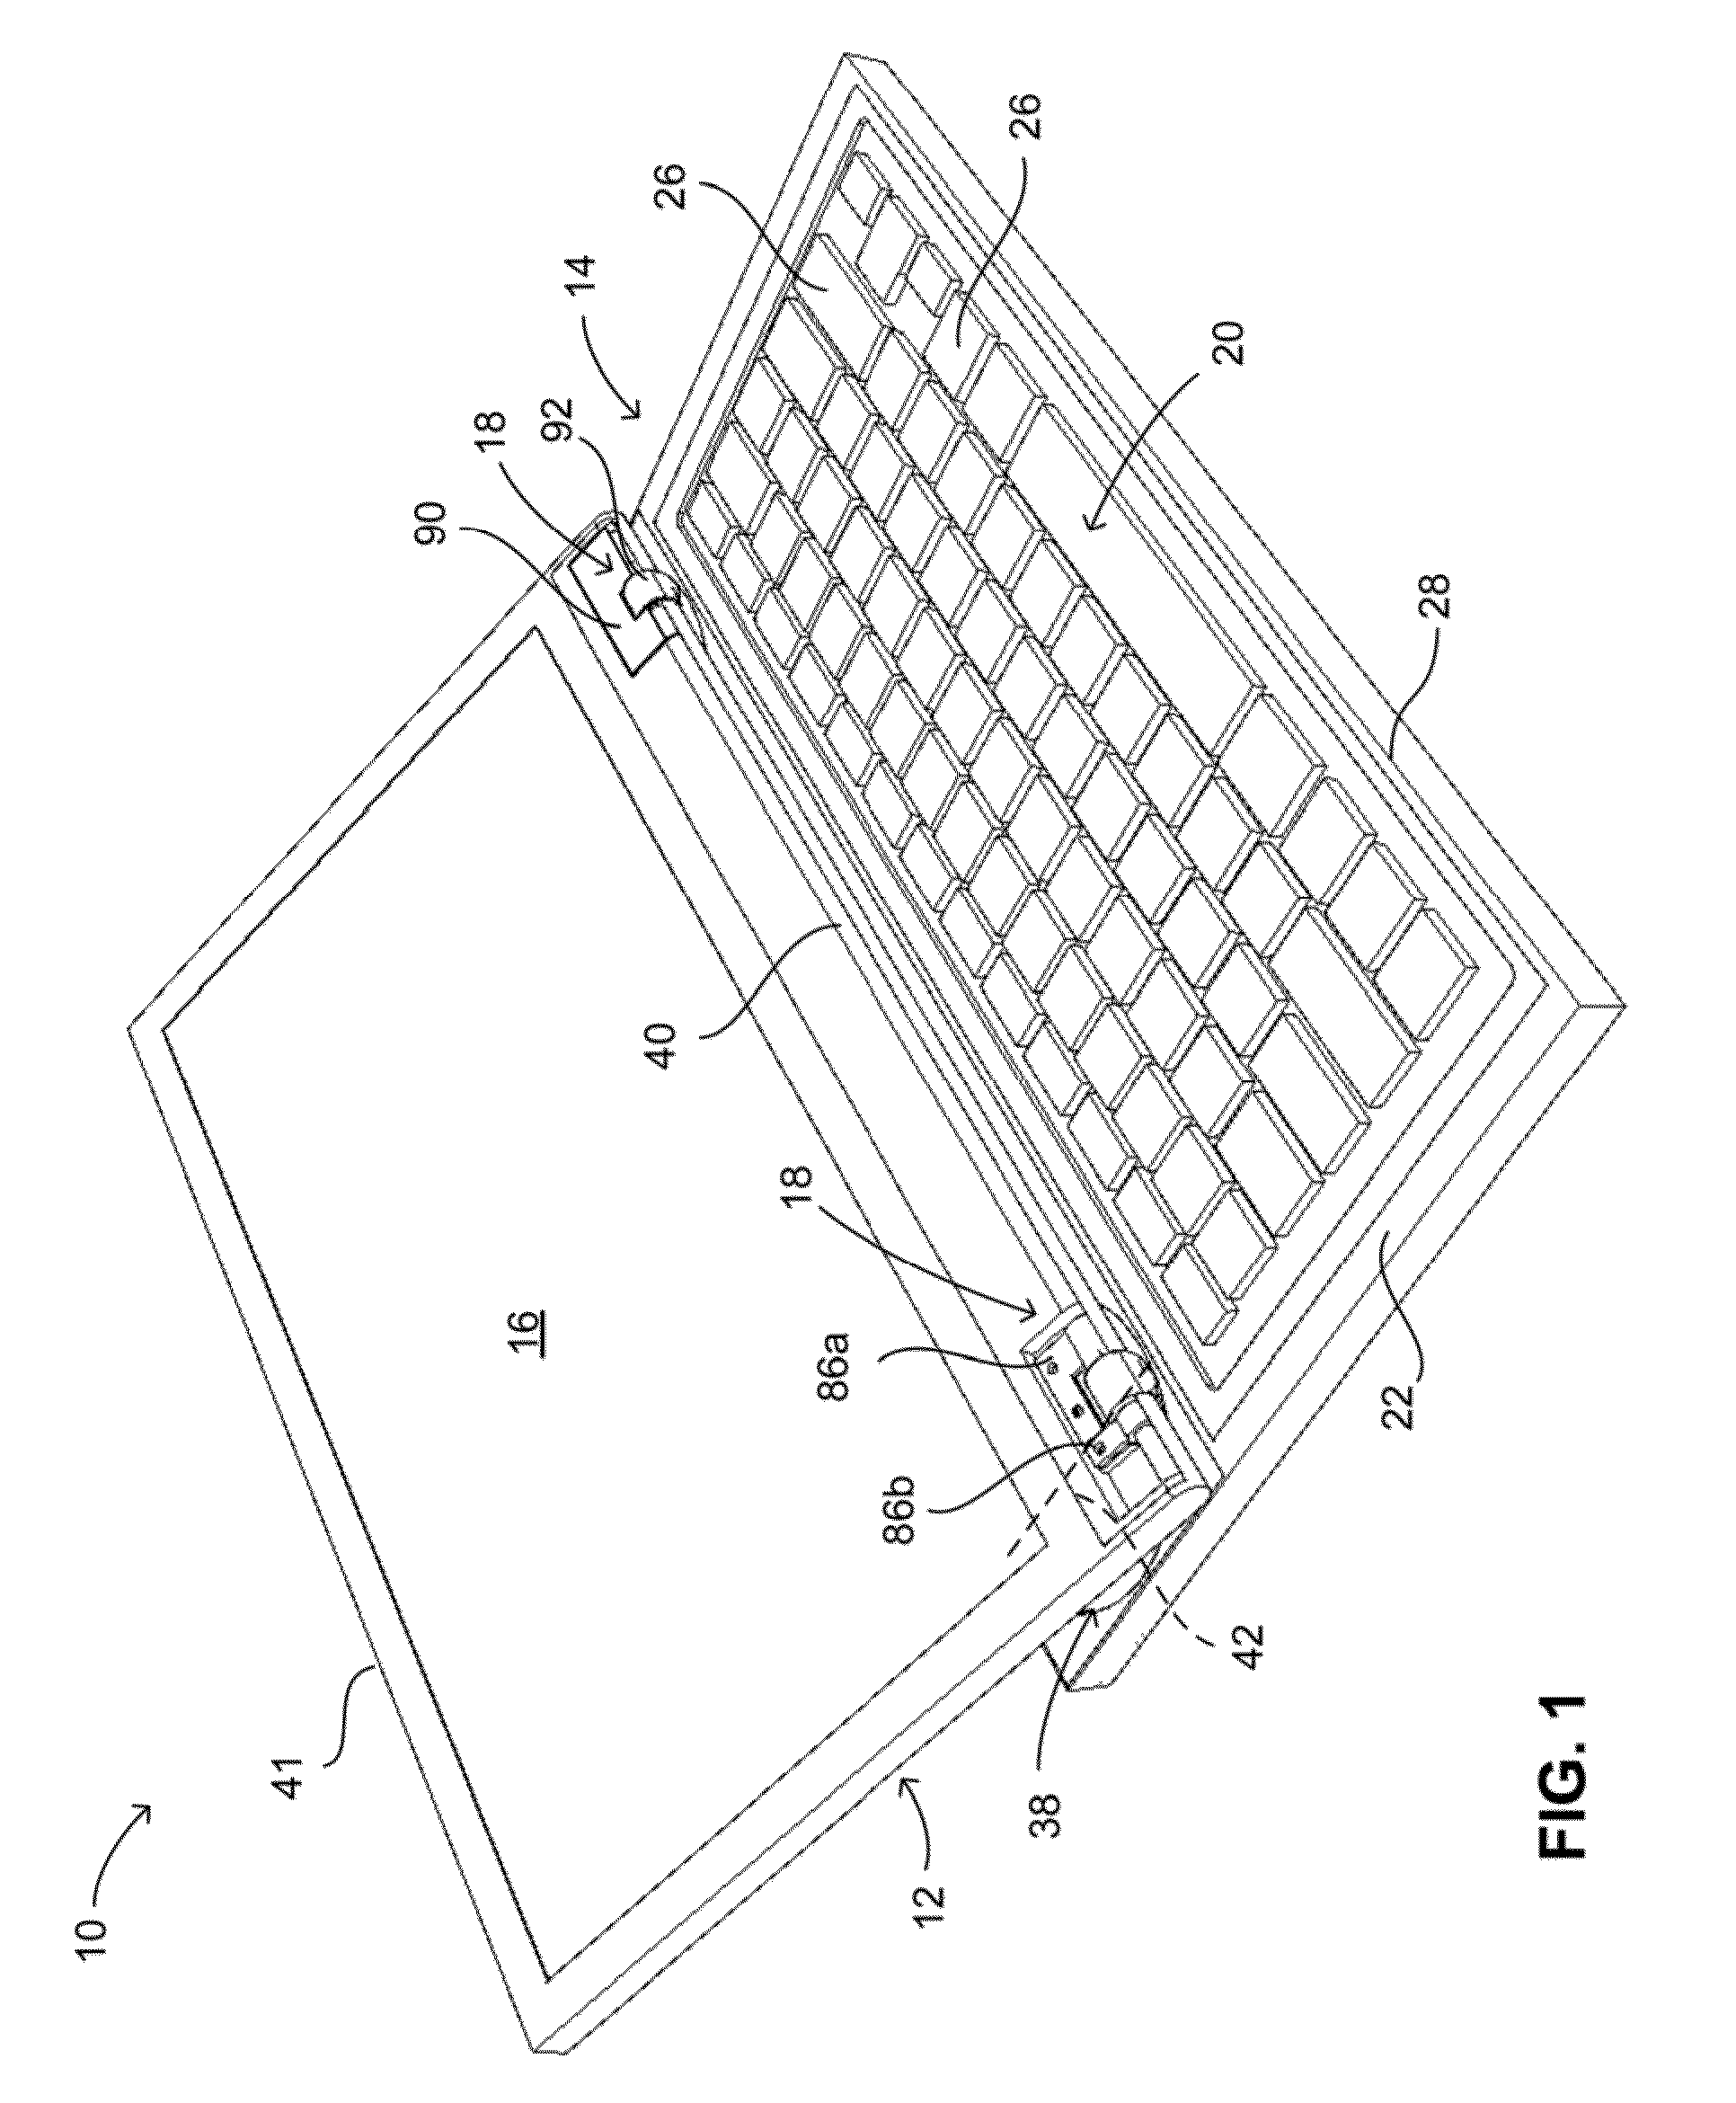 Coupling element for hinged electronic device